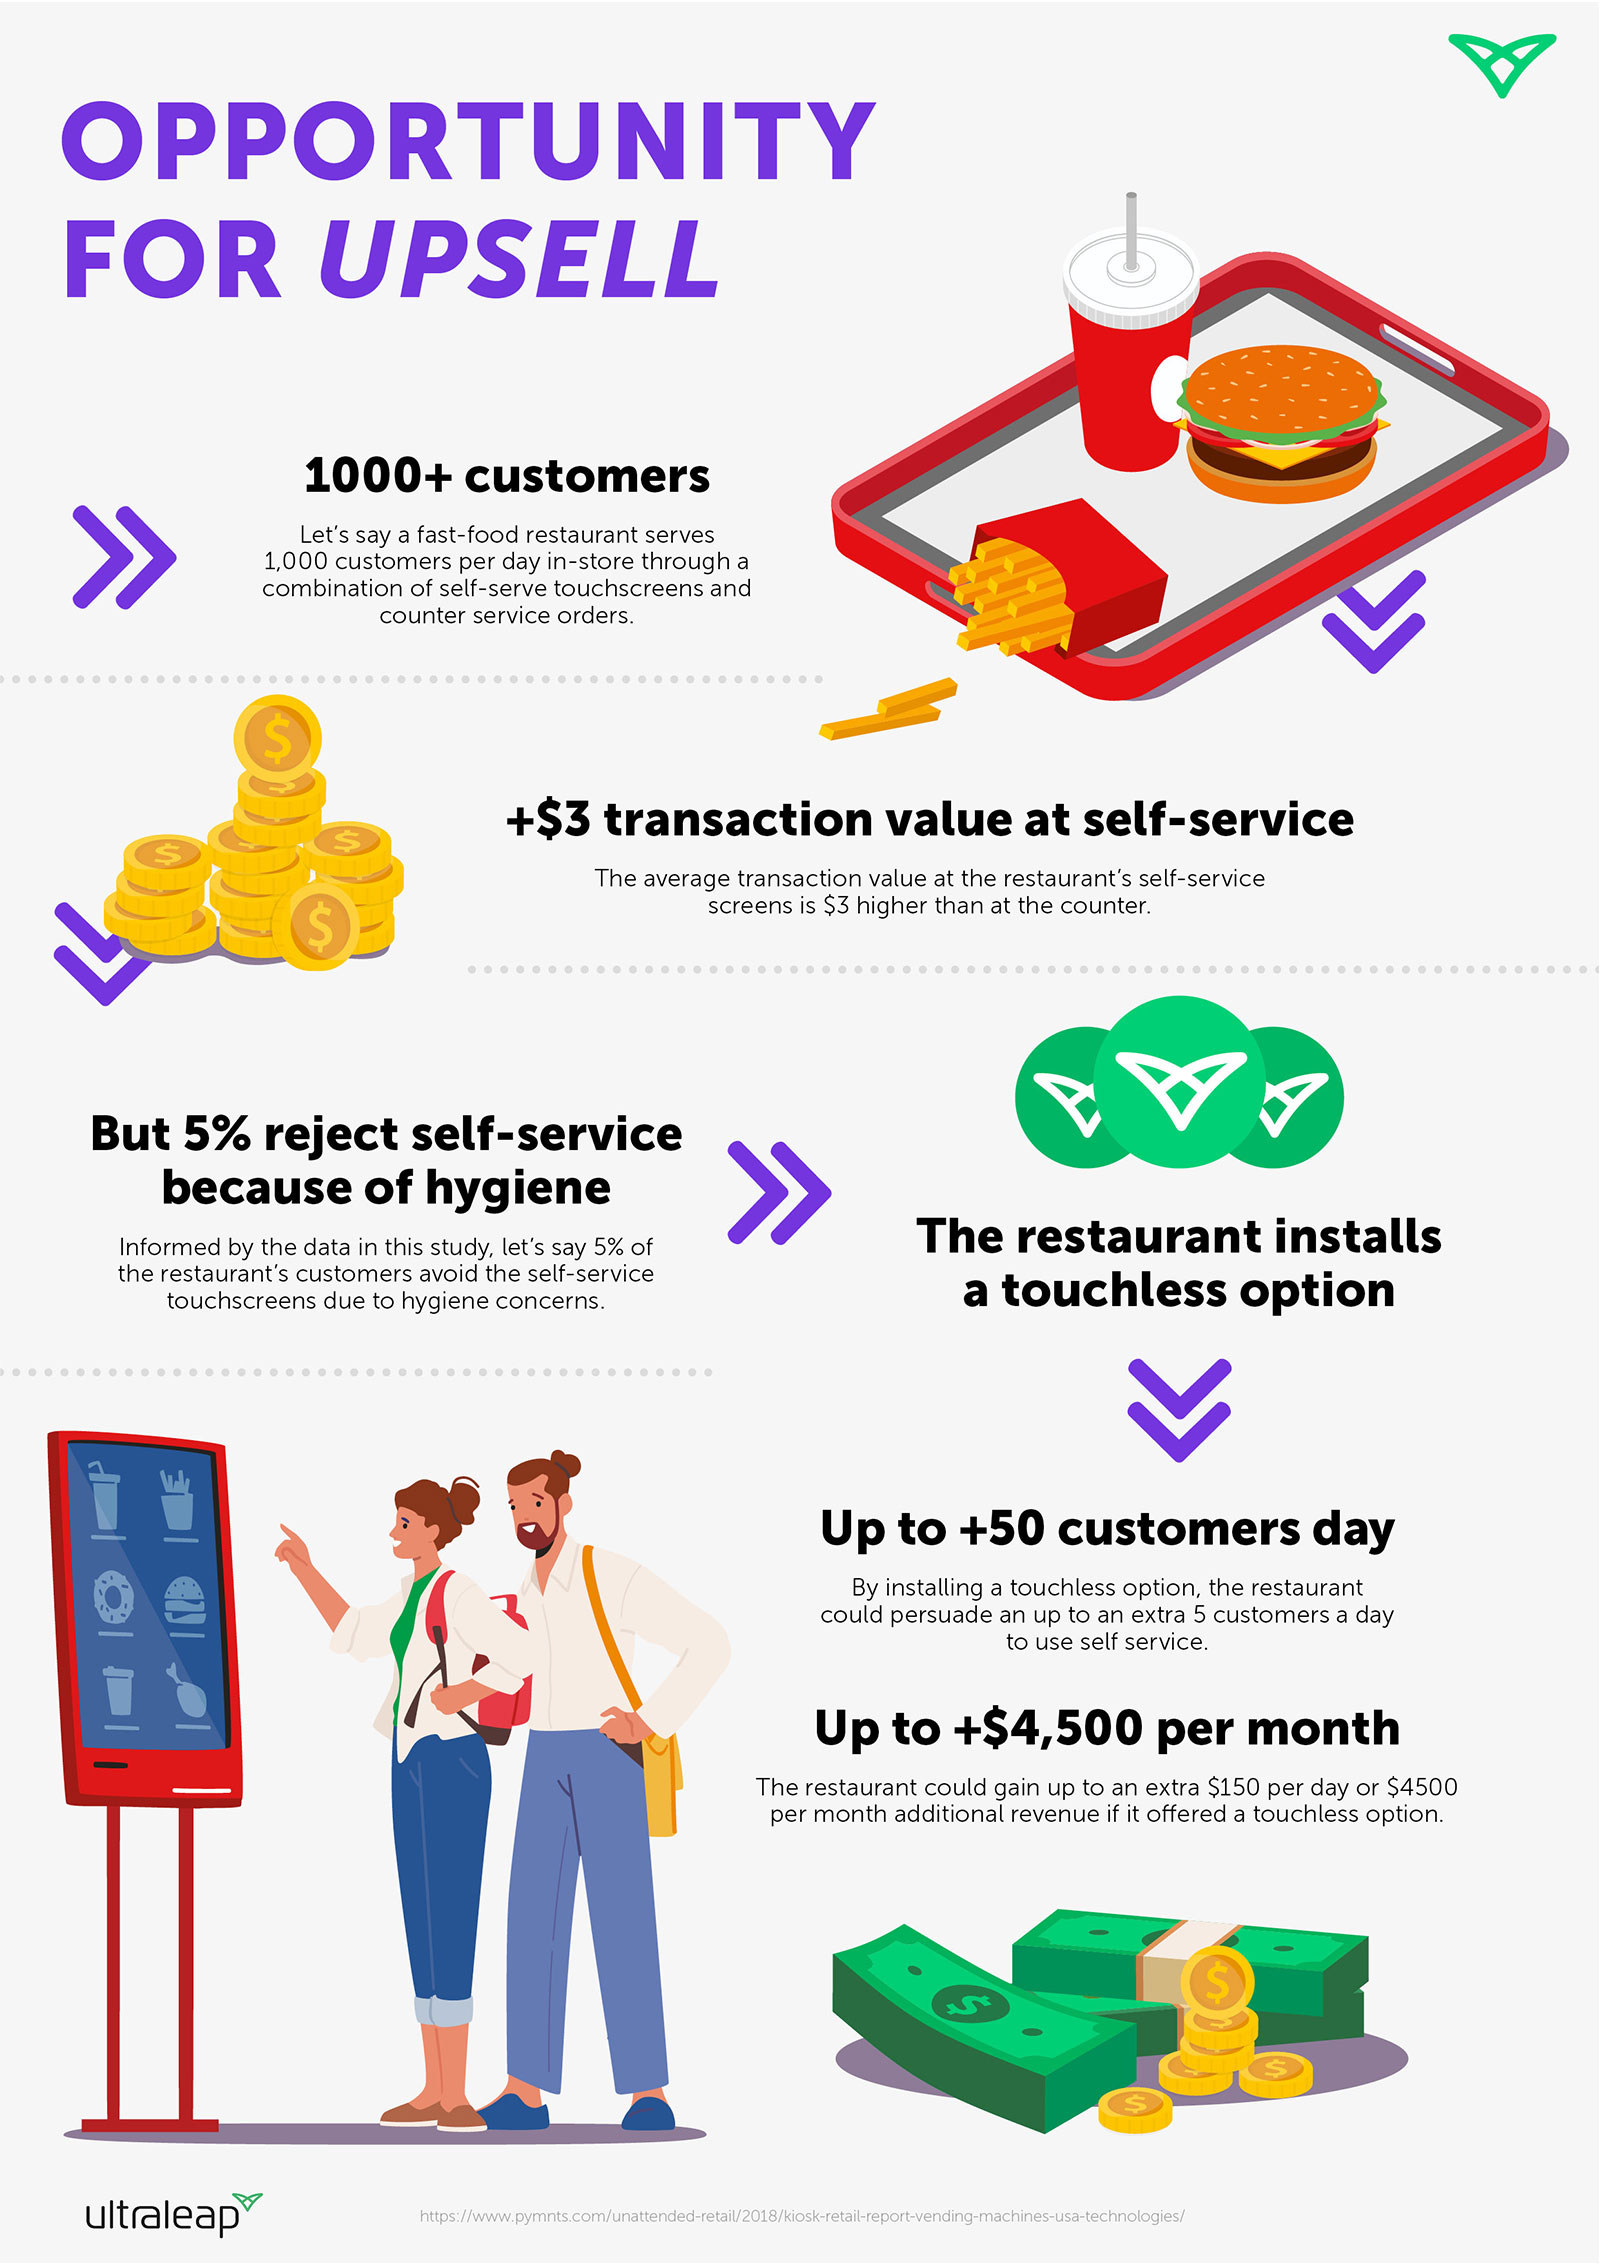 Ultraleap opportunity for upsell infographic for the future of QSR and retail